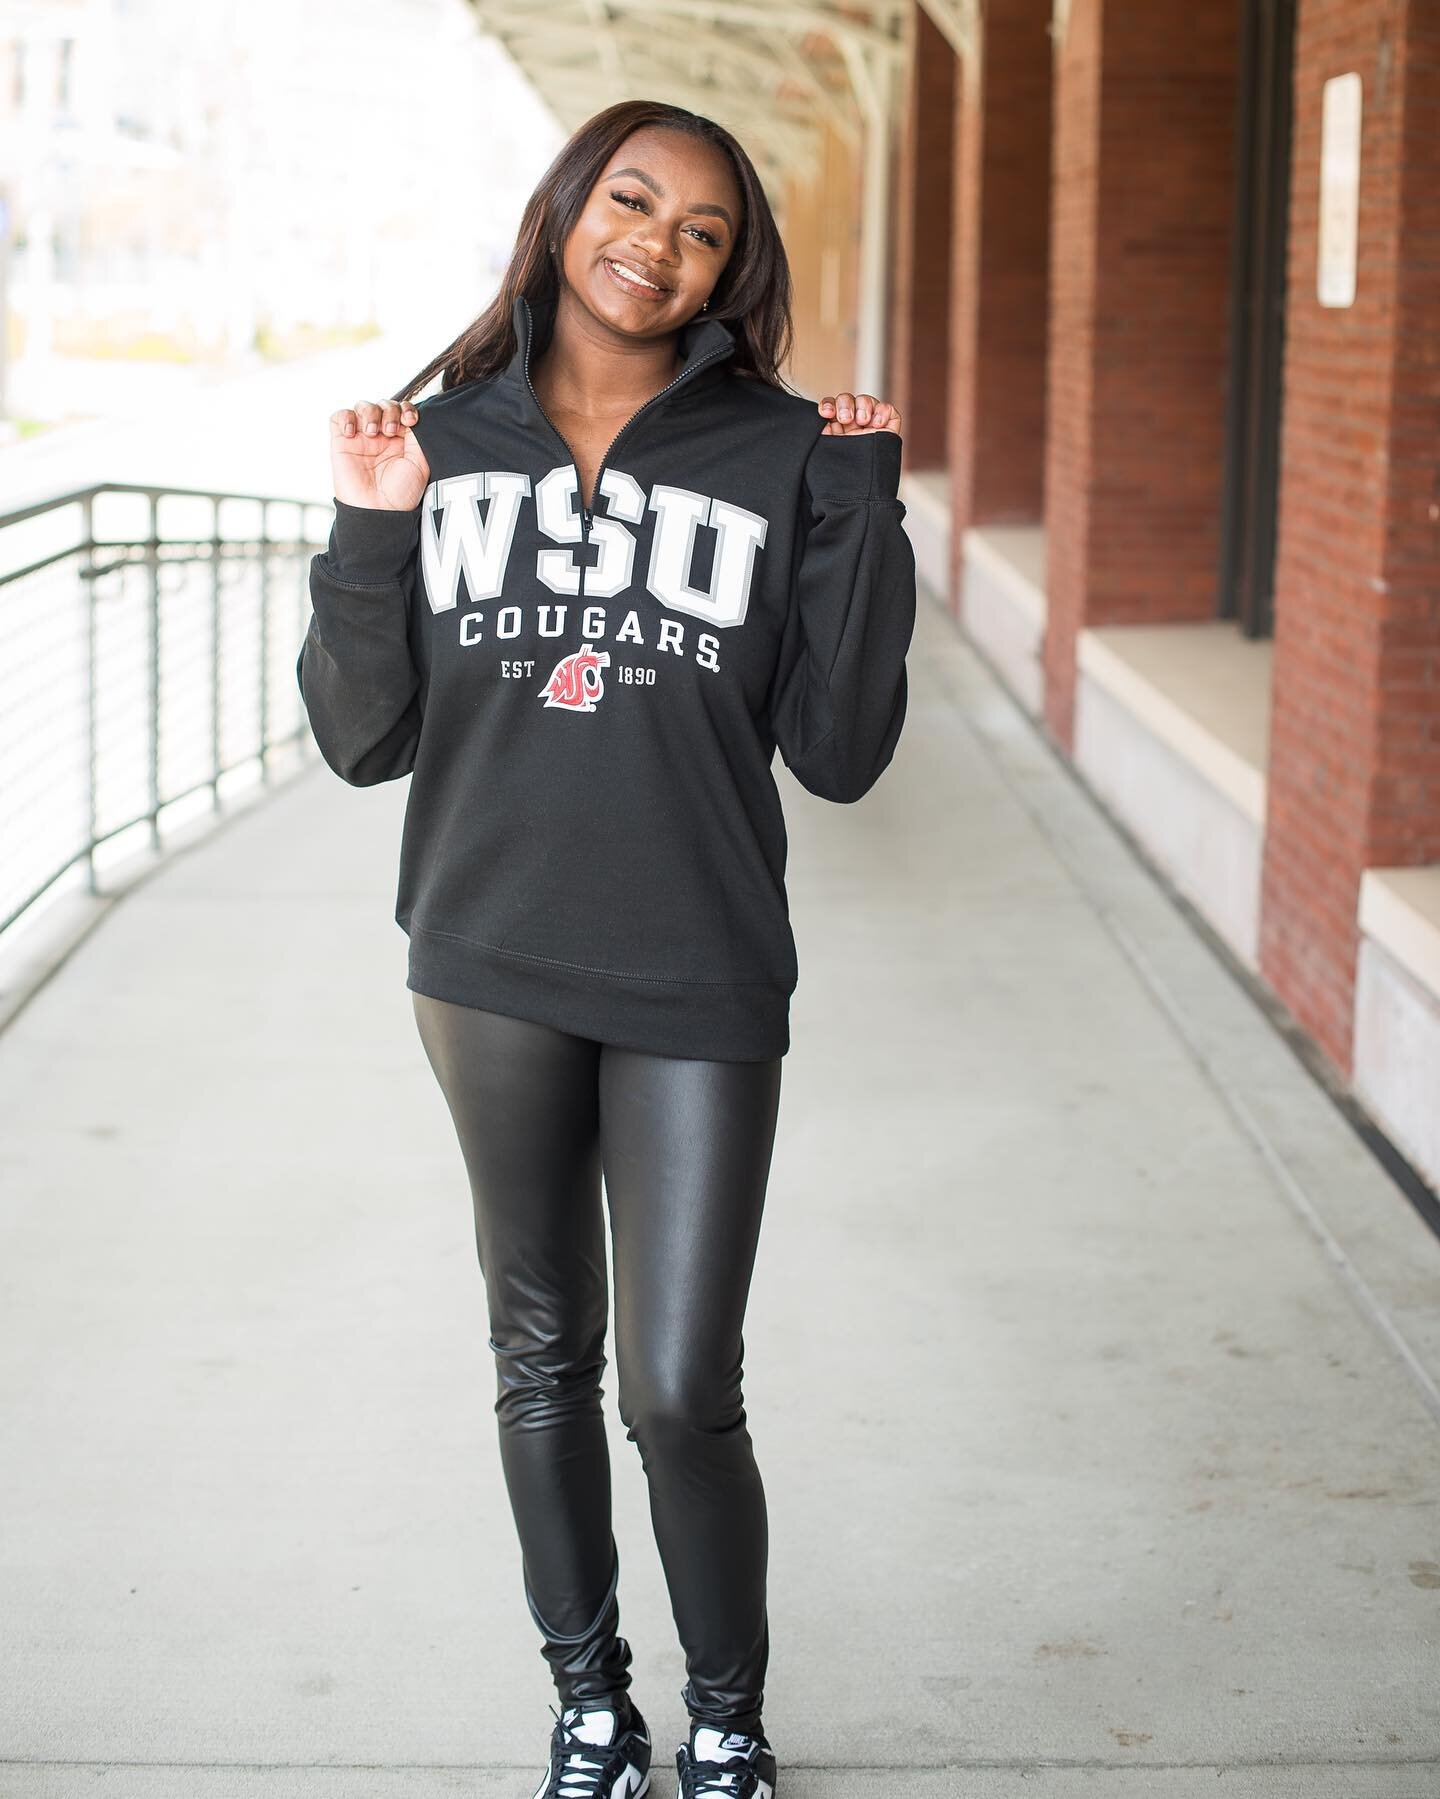 What school are you repping? To the class of 2023, it&rsquo;s time to grab your intended college gear and take some photos! Now booking&hellip; DM/Email to schedule your session! 
___________________
#KaribaPhotography #collegelife #SeattlePhotograph